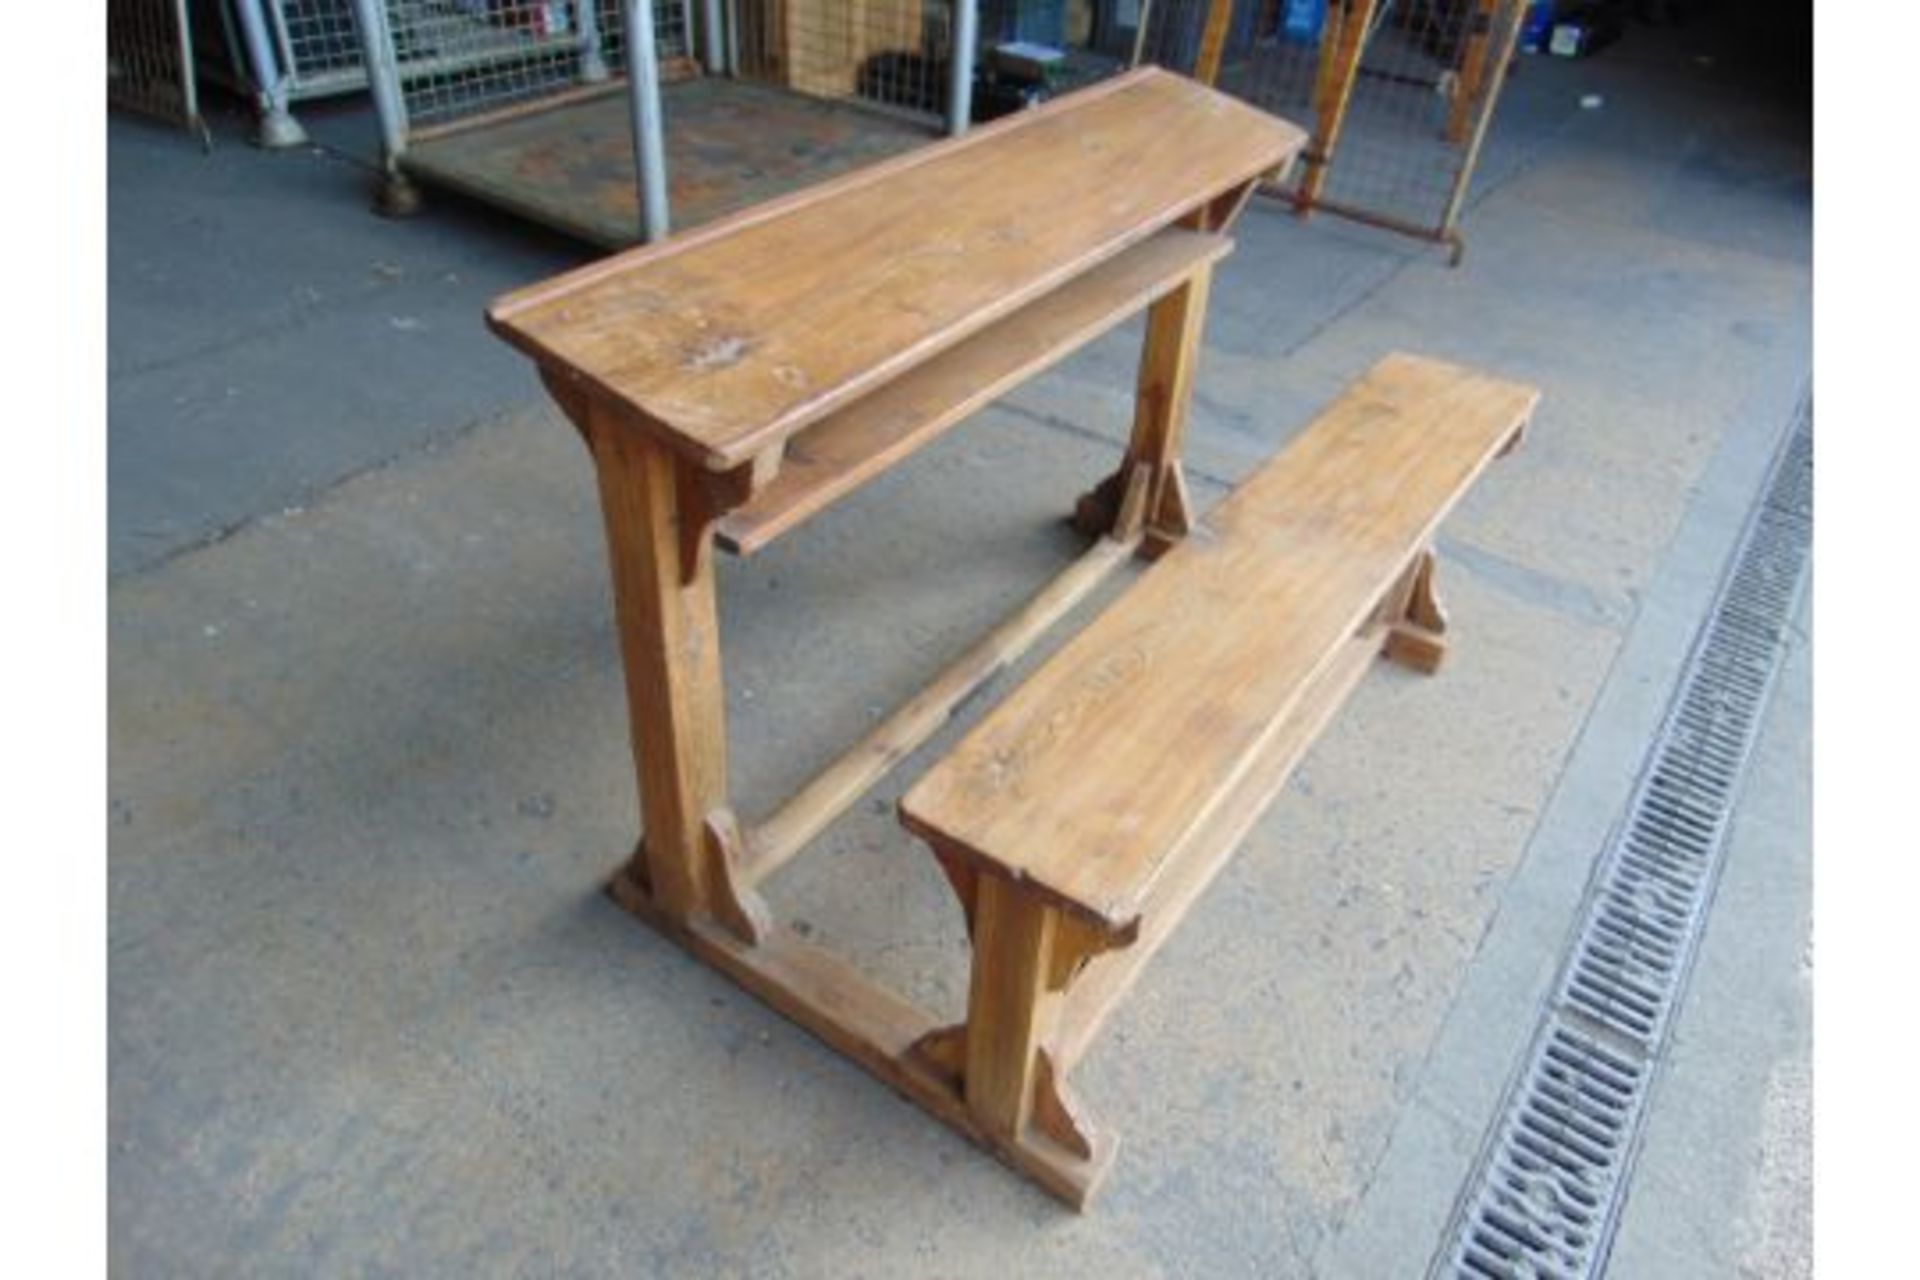 Antique Traditional Wooden School Bench Desk - Image 3 of 6